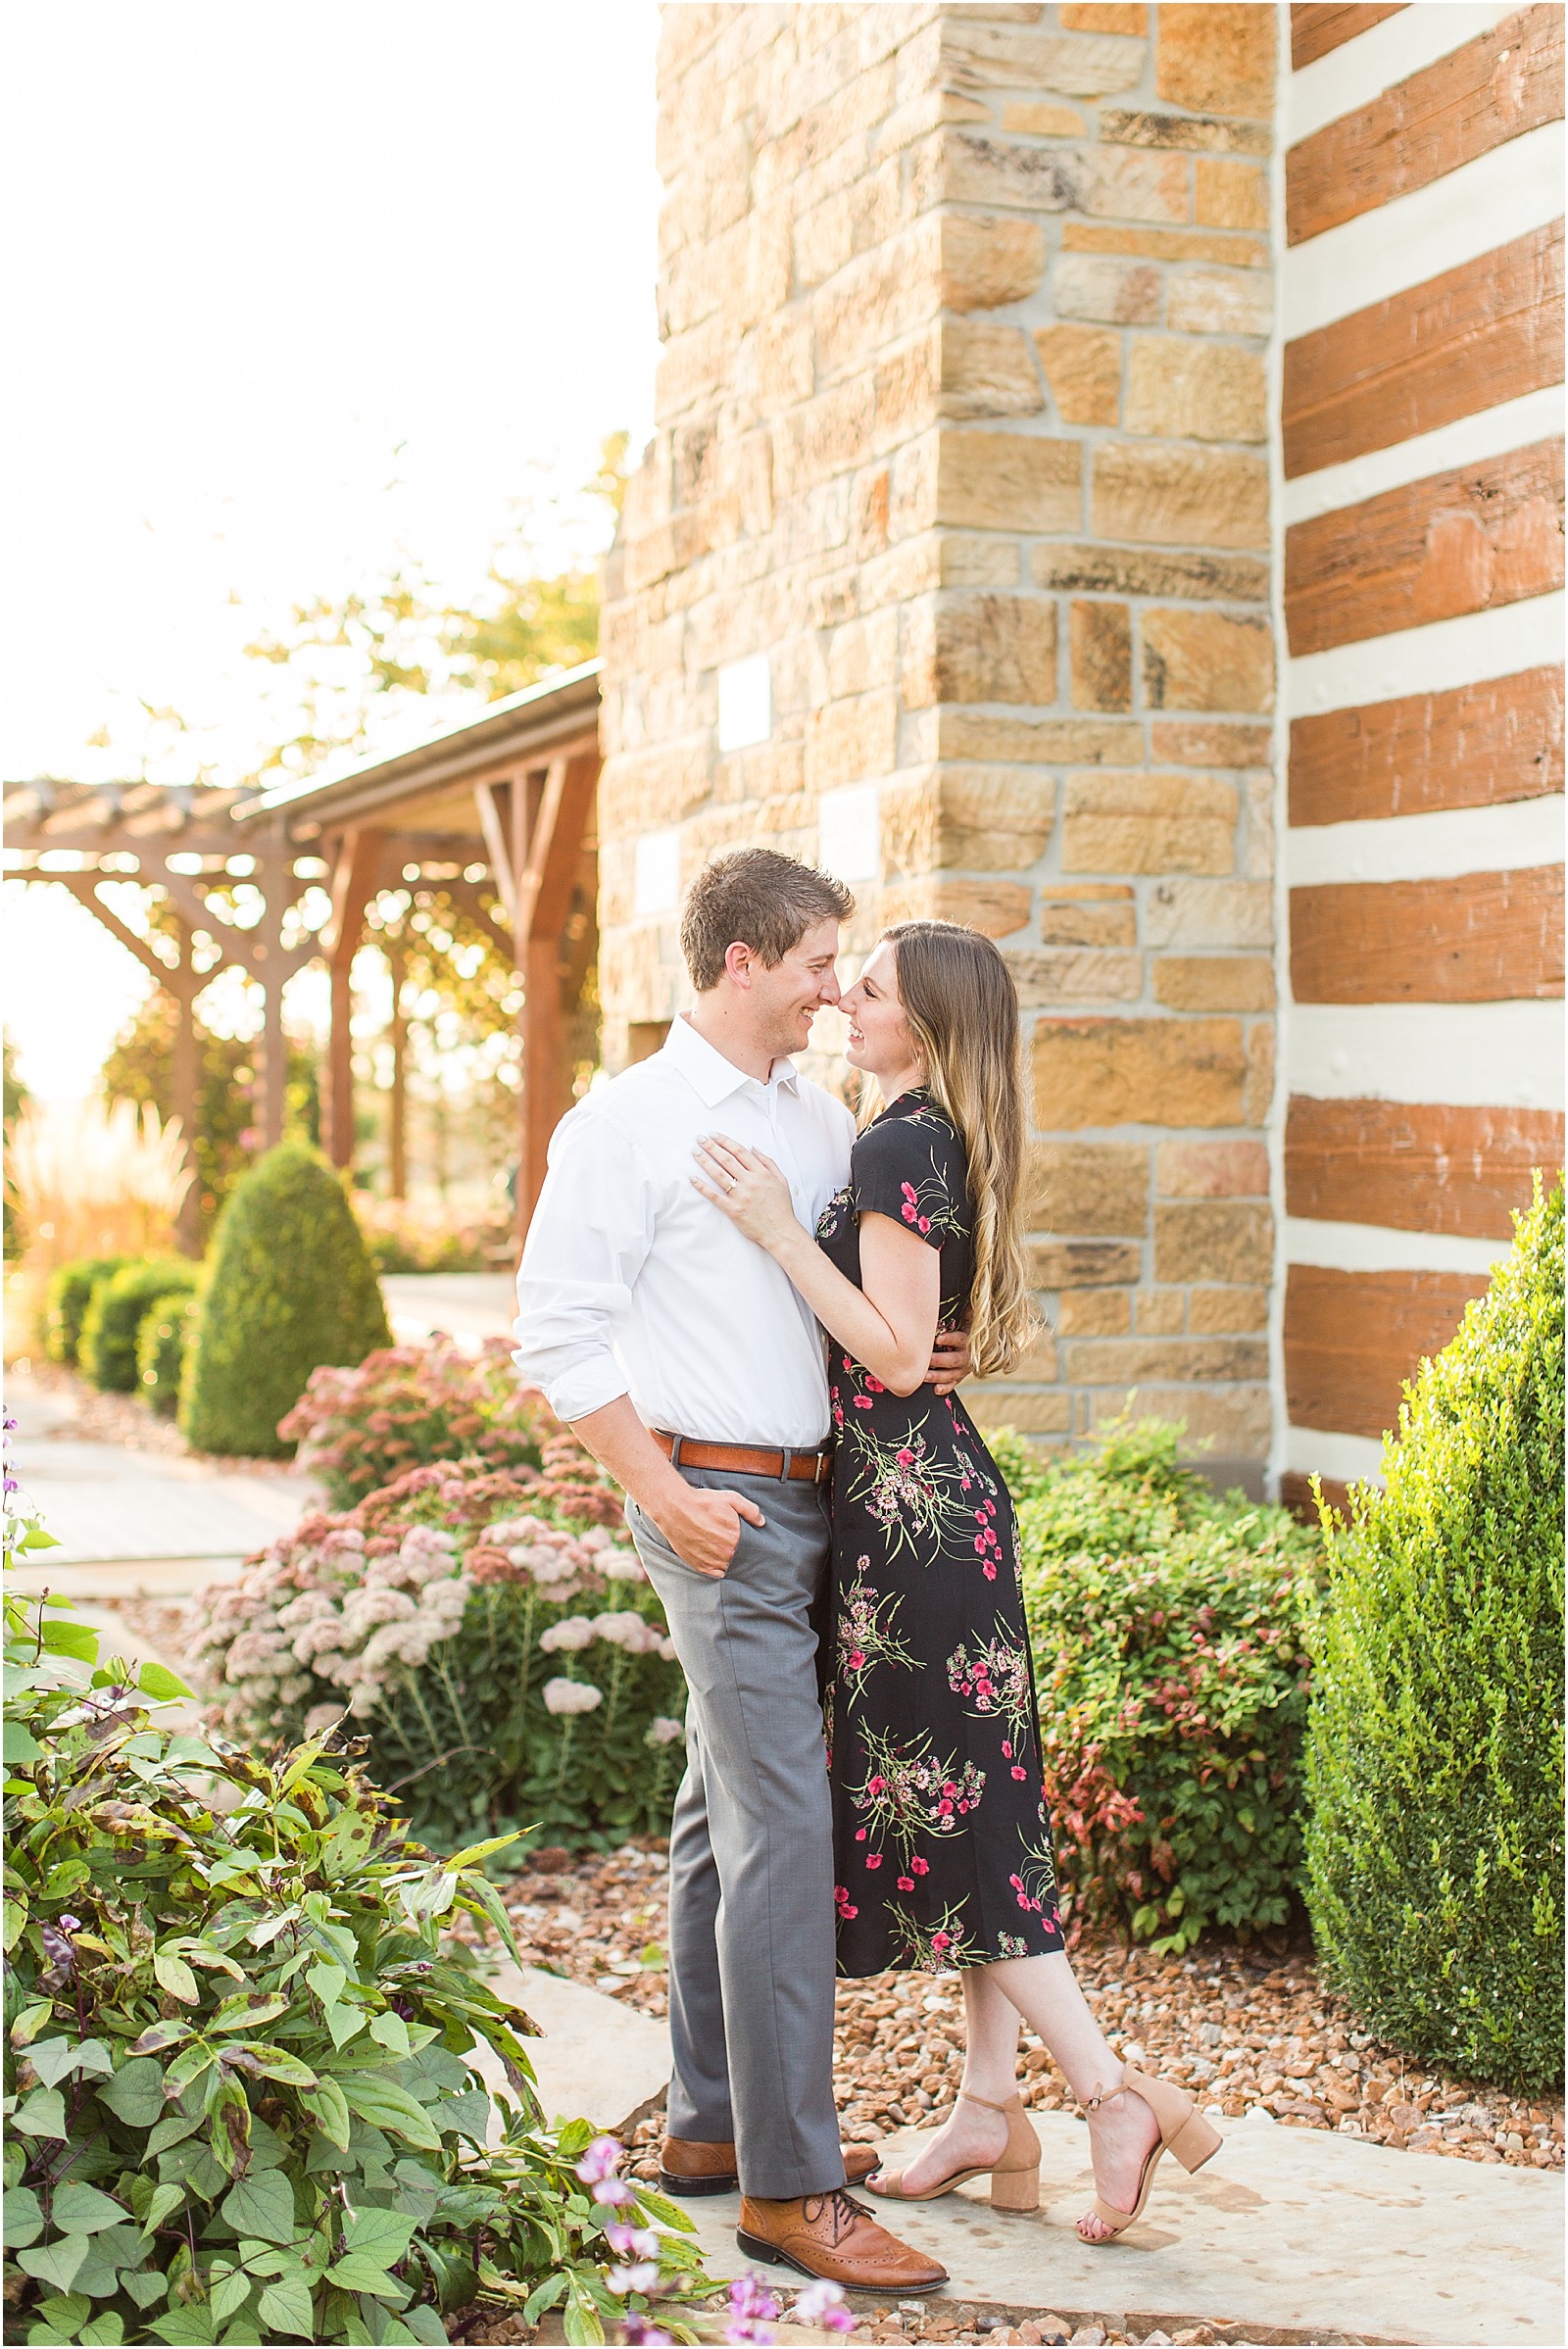 A Jasper Indiana Engagement Session | Tori and Kyle | Bret and Brandie Photography025.jpg